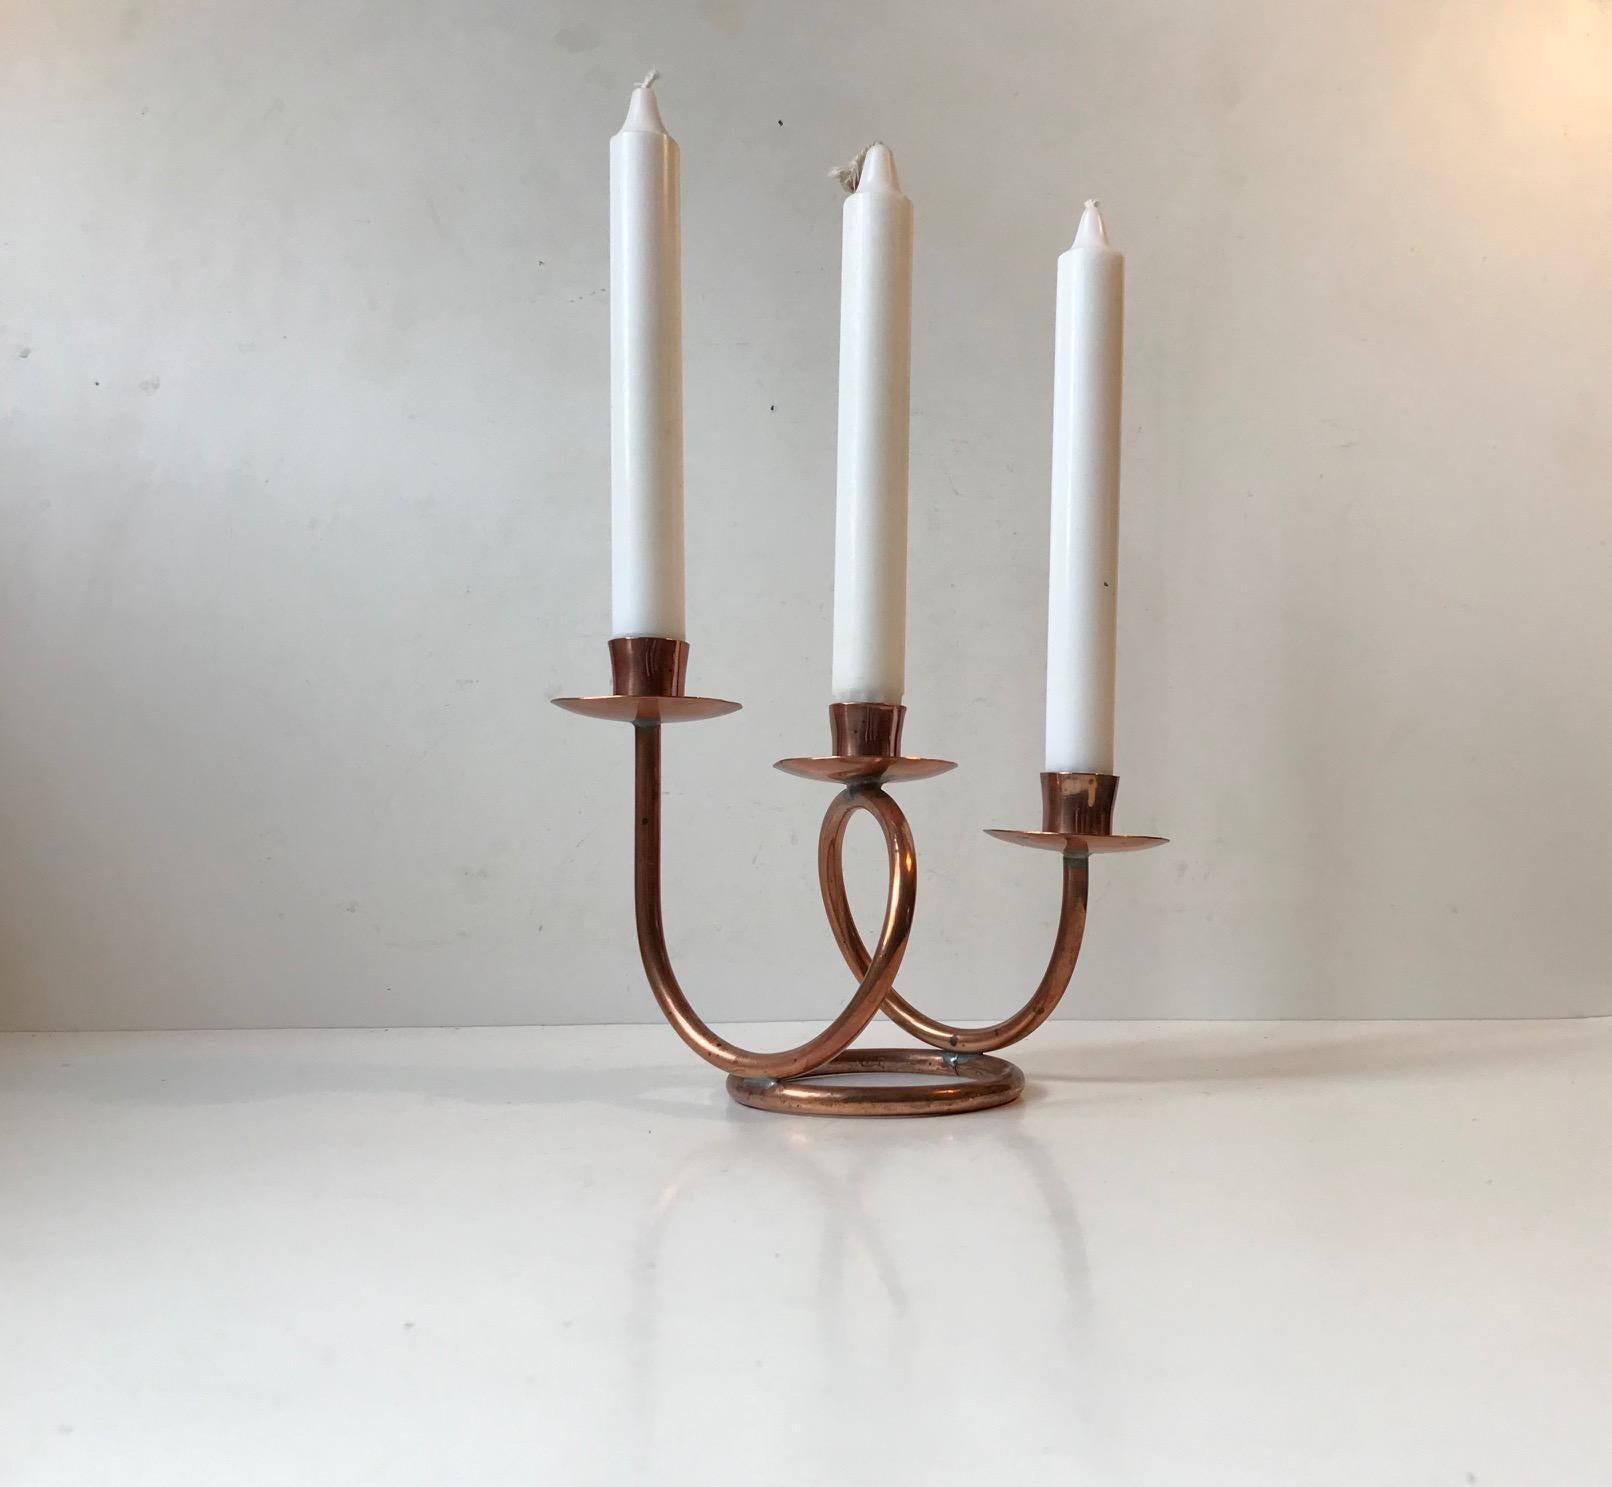 Small unique candelabra fashioned from bend solid copper tubes. Made by hand in a small workshop in Hejl, Denmark during the 1970s. It is to be installed with regular sized candles.